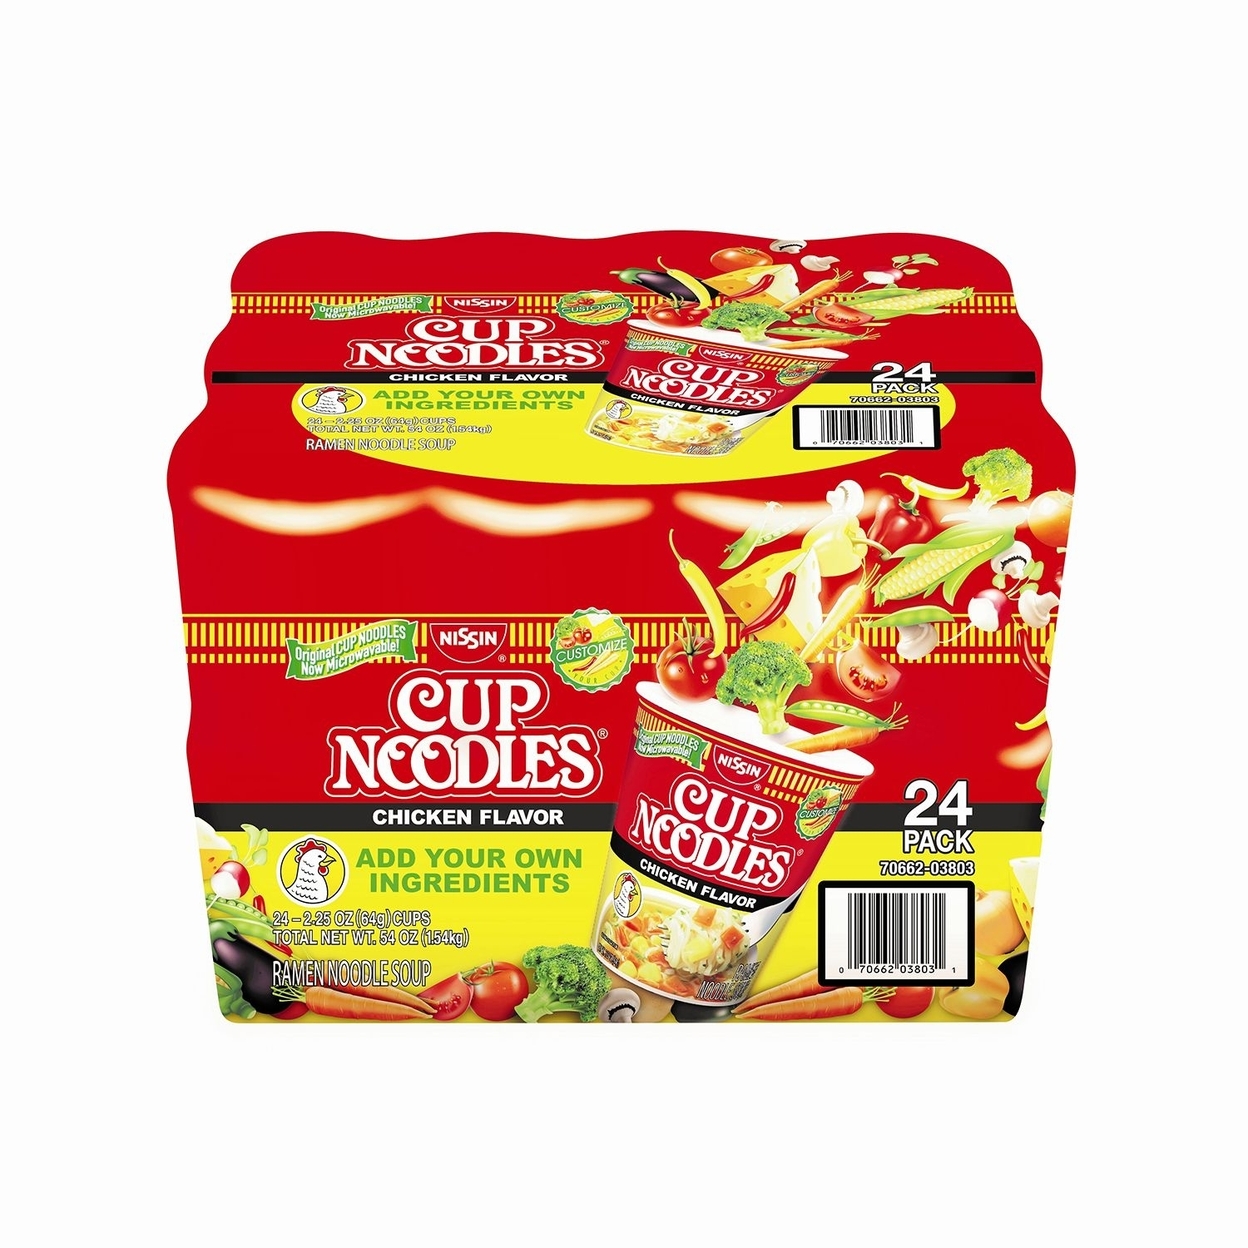 Nissin Cup Noodles Chicken Flavor (2.25 Ounce, 24 Pack)